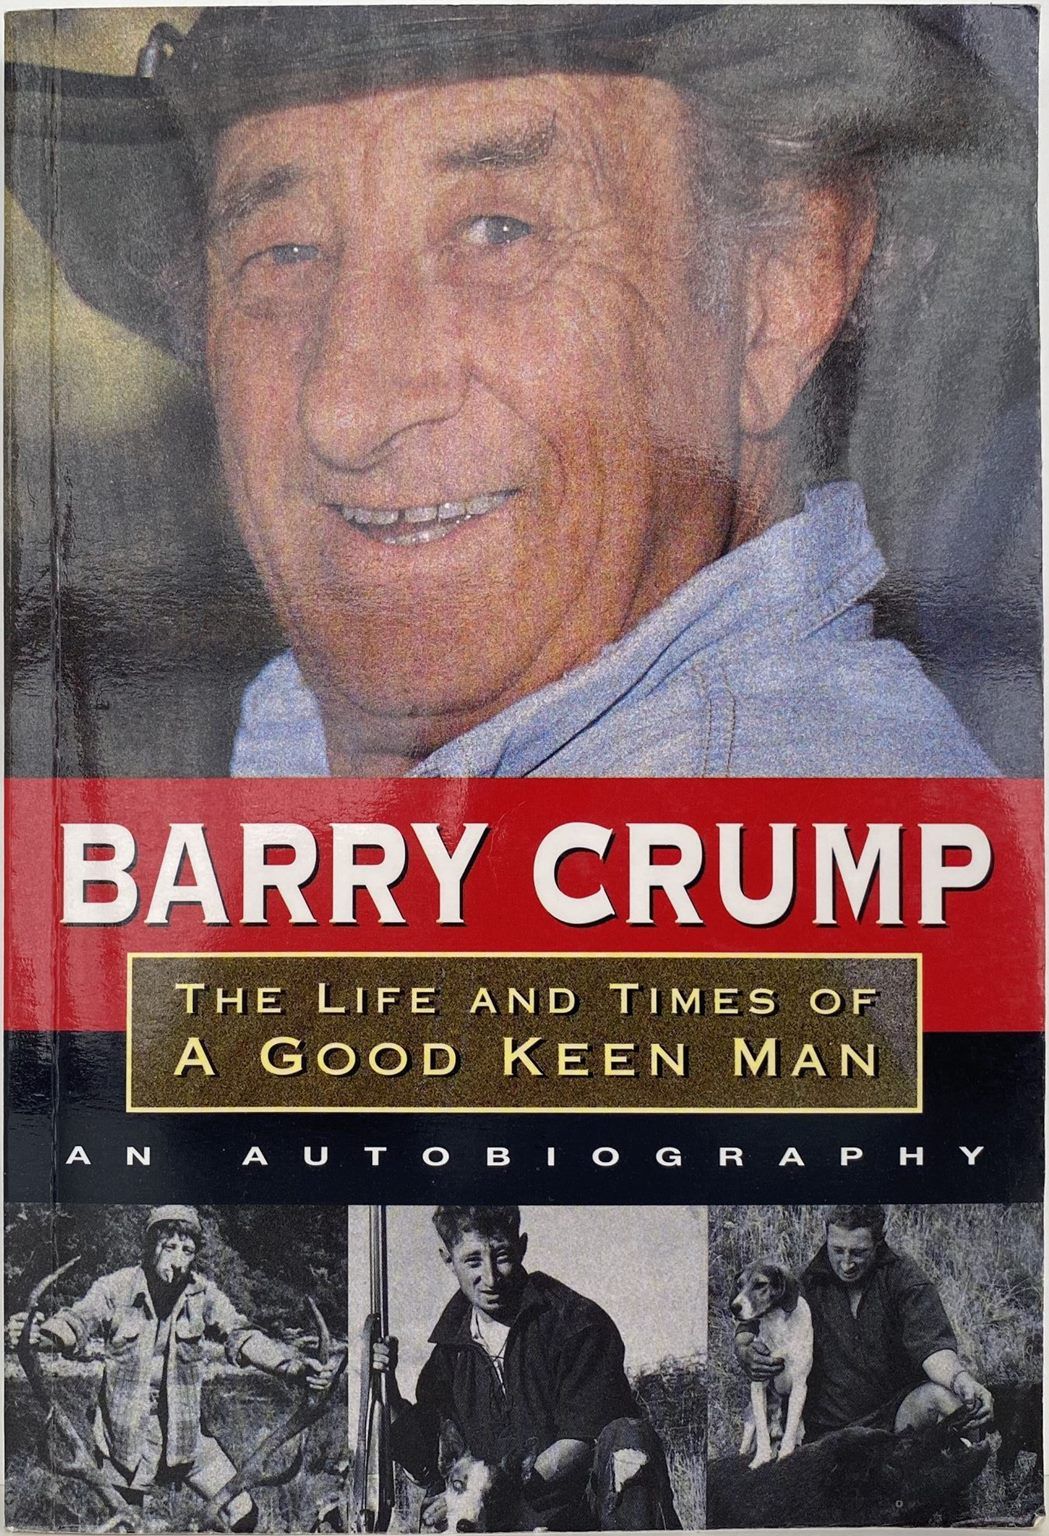 BARRY CRUMP: The Life and Times of a Good Keen Man - An Autobiography